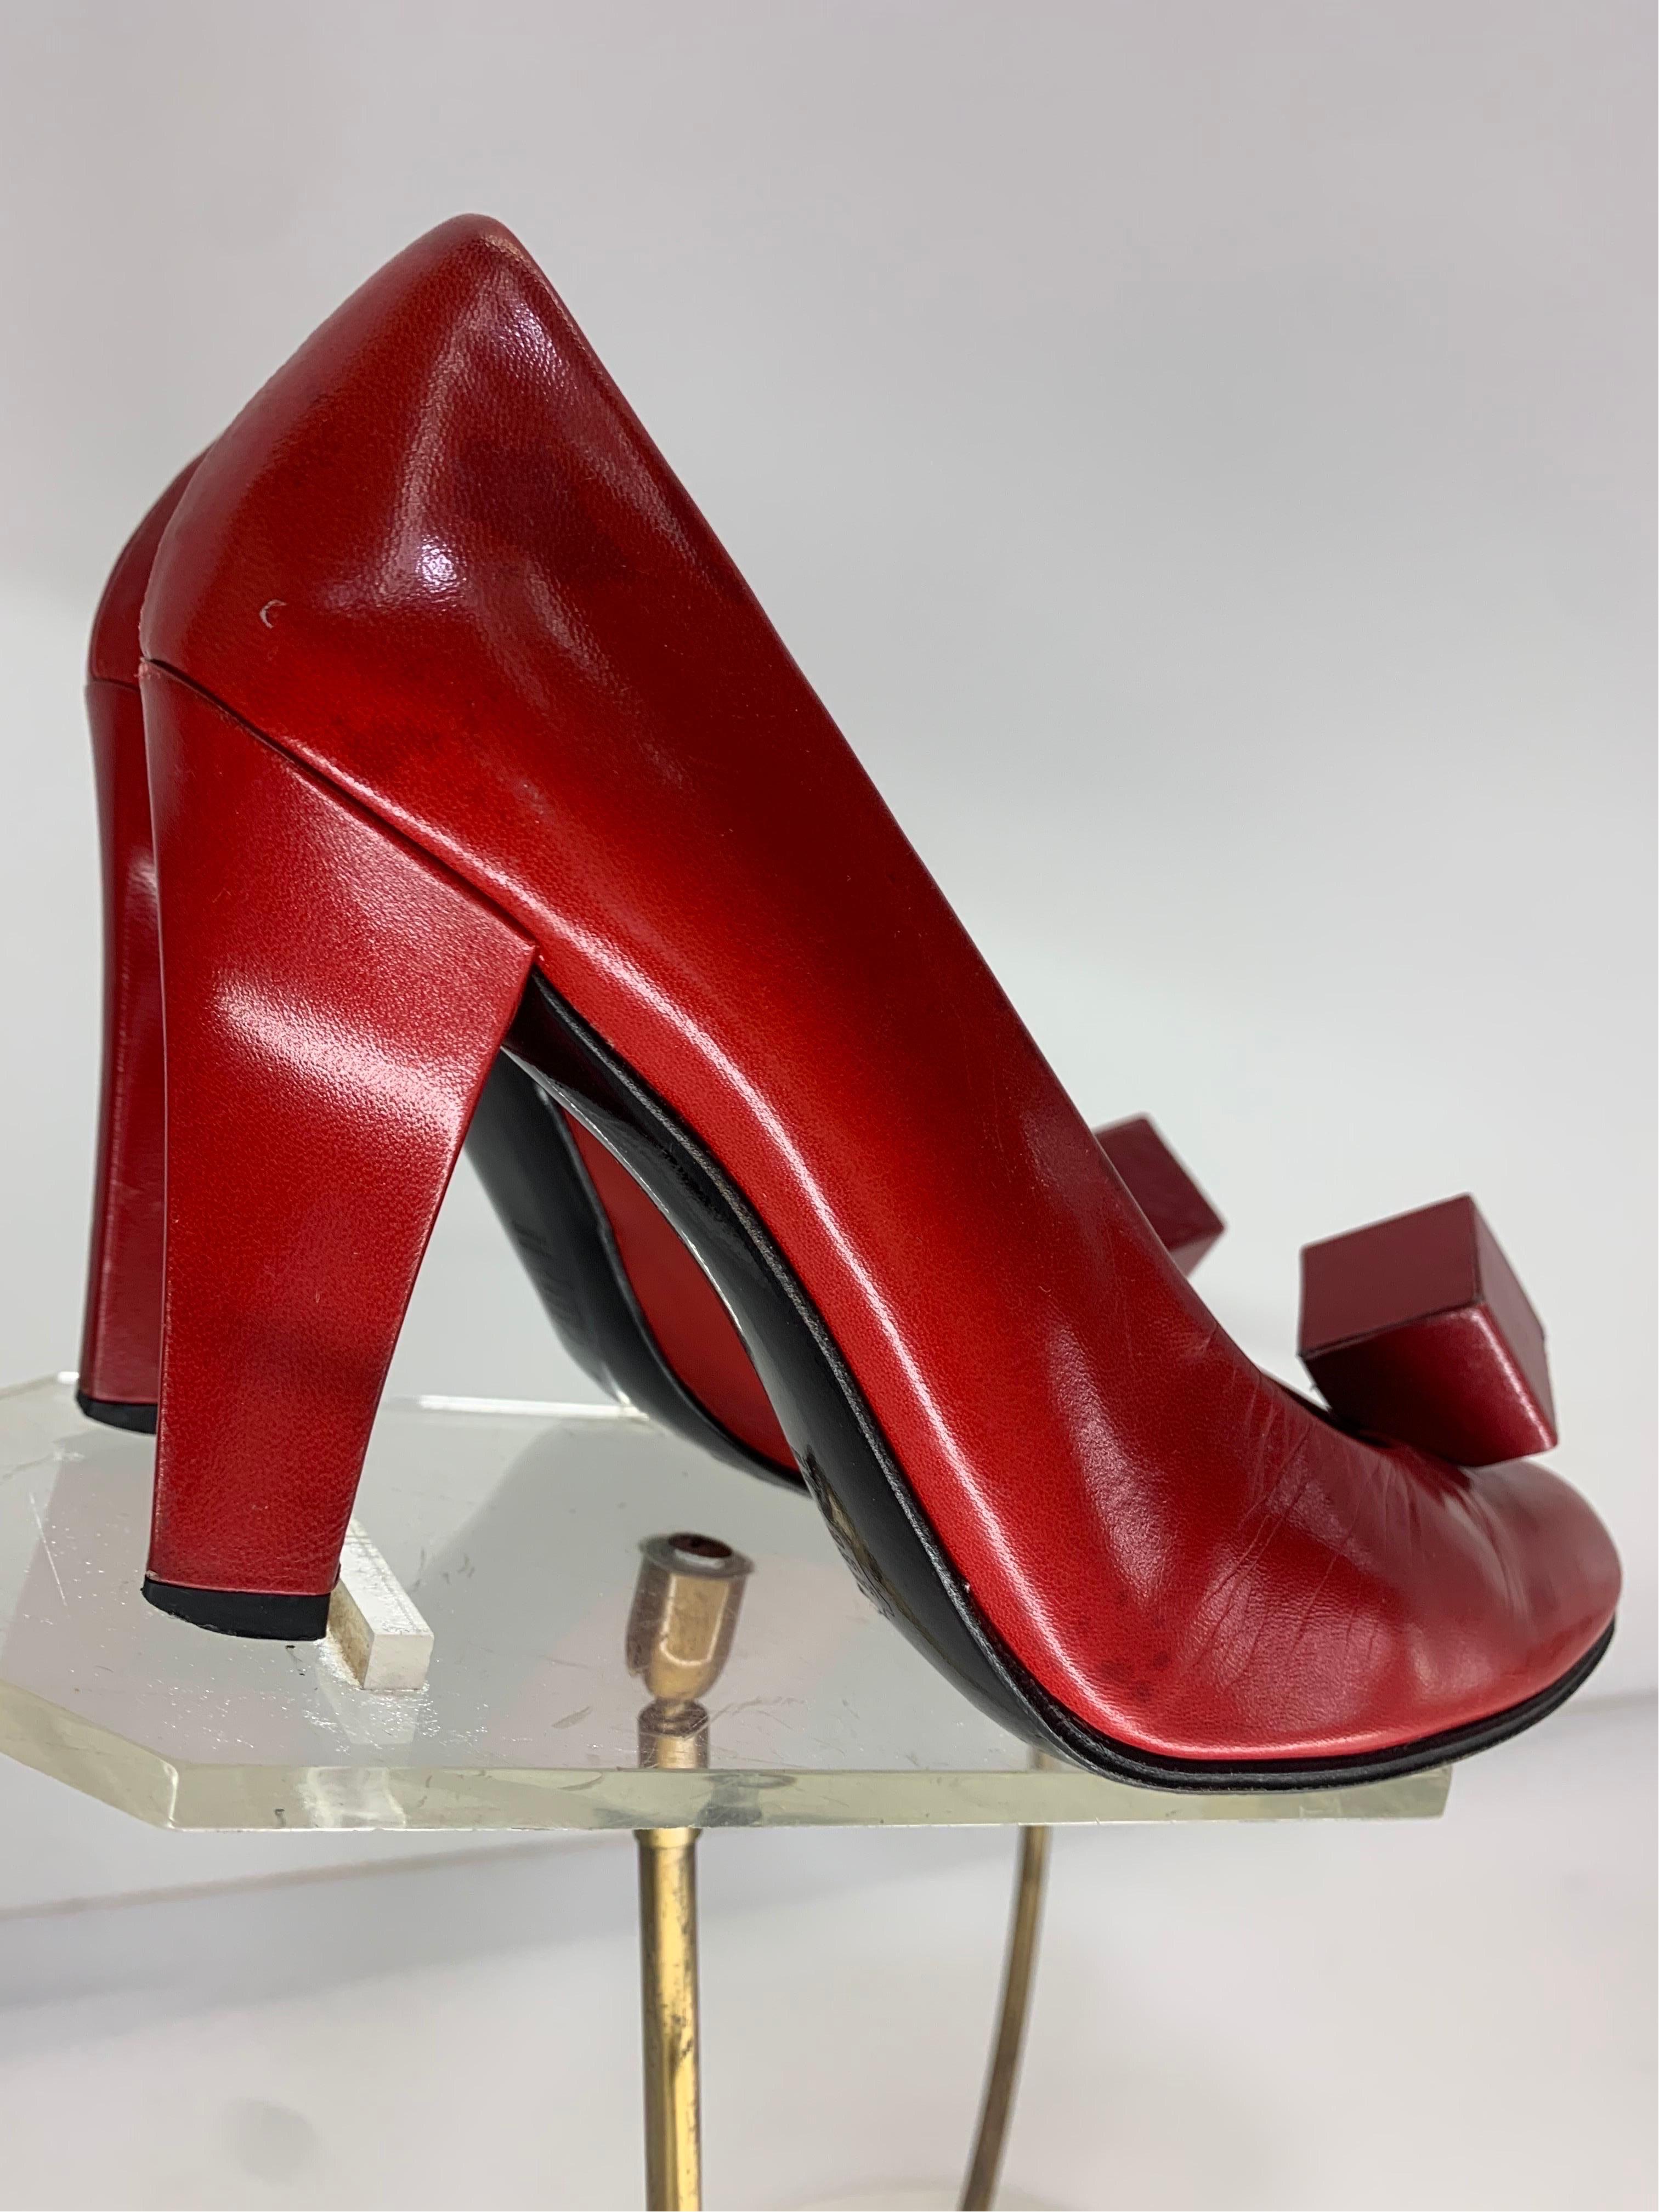 A fabulous 1970s pair of crimson red leather high heeled pumps by Charles Jourdan with a well-known signature cube ornament at toe!  Size 5 to 5.5